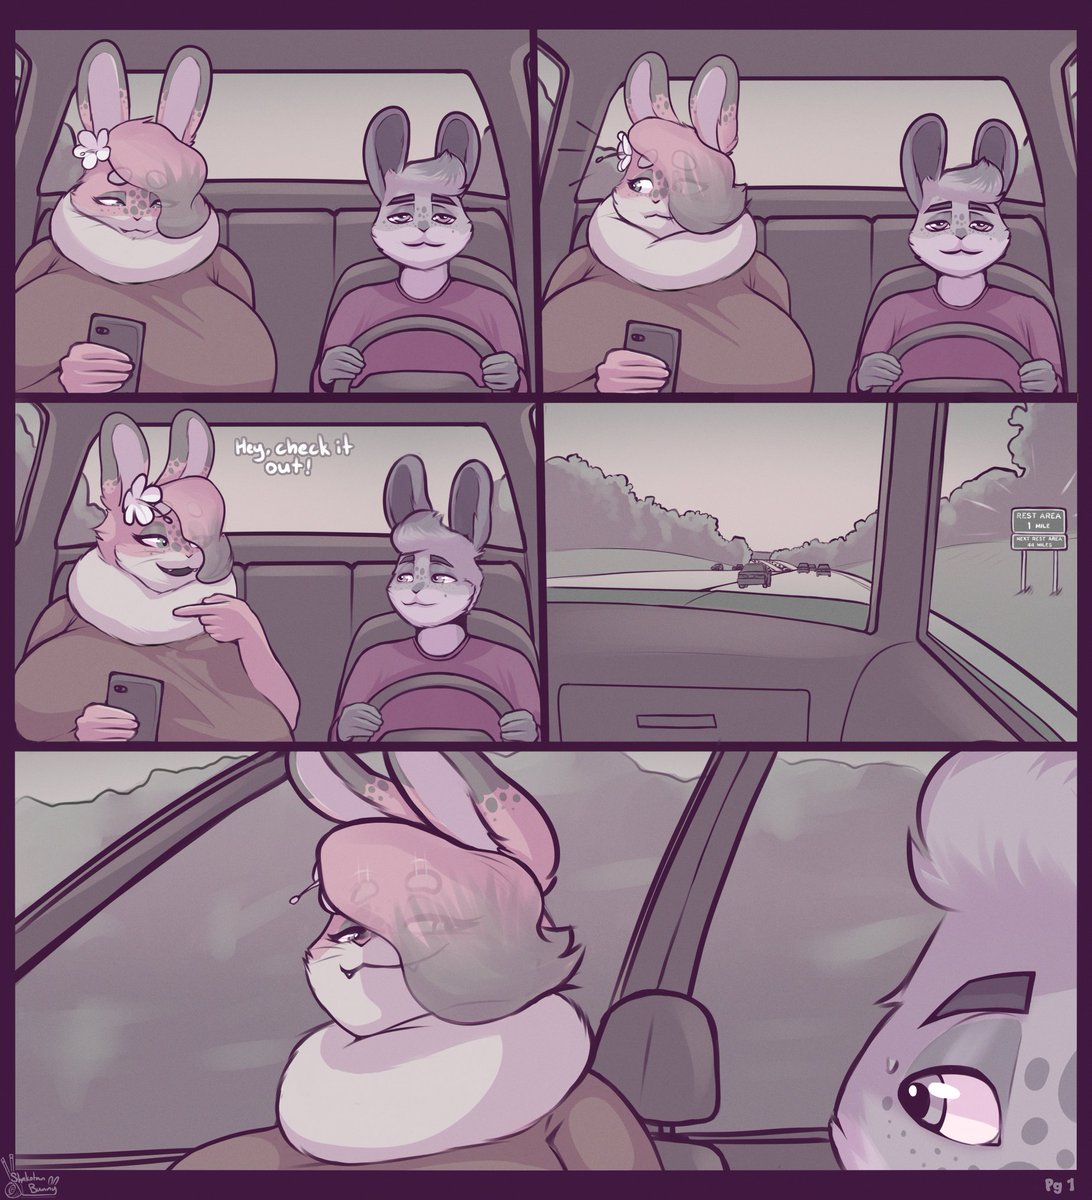 1 a new comic I've been working on for a bit!Klaus and Hazel take a ro...